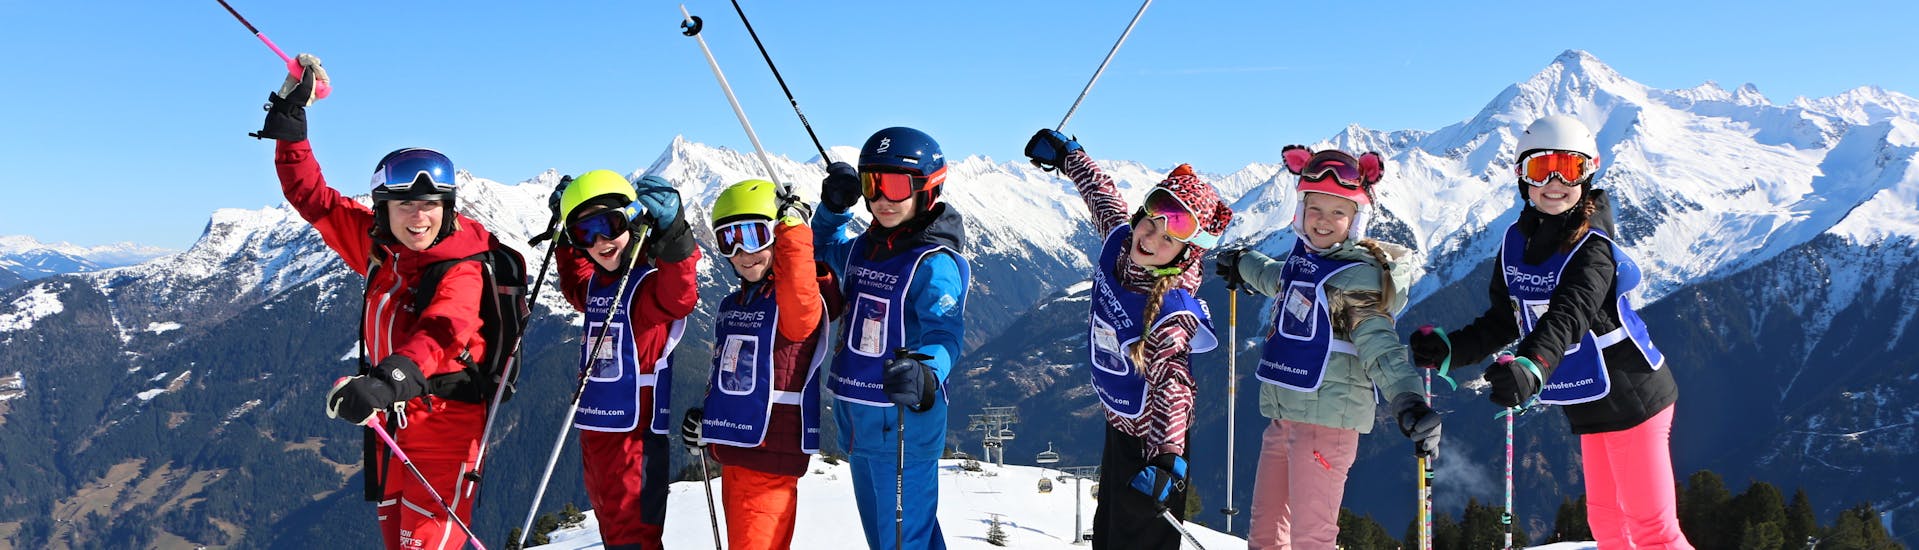 Kids Ski Lessons (5-14 y.) for Skiers with Experience from Ski School Snowsports Mayrhofen.